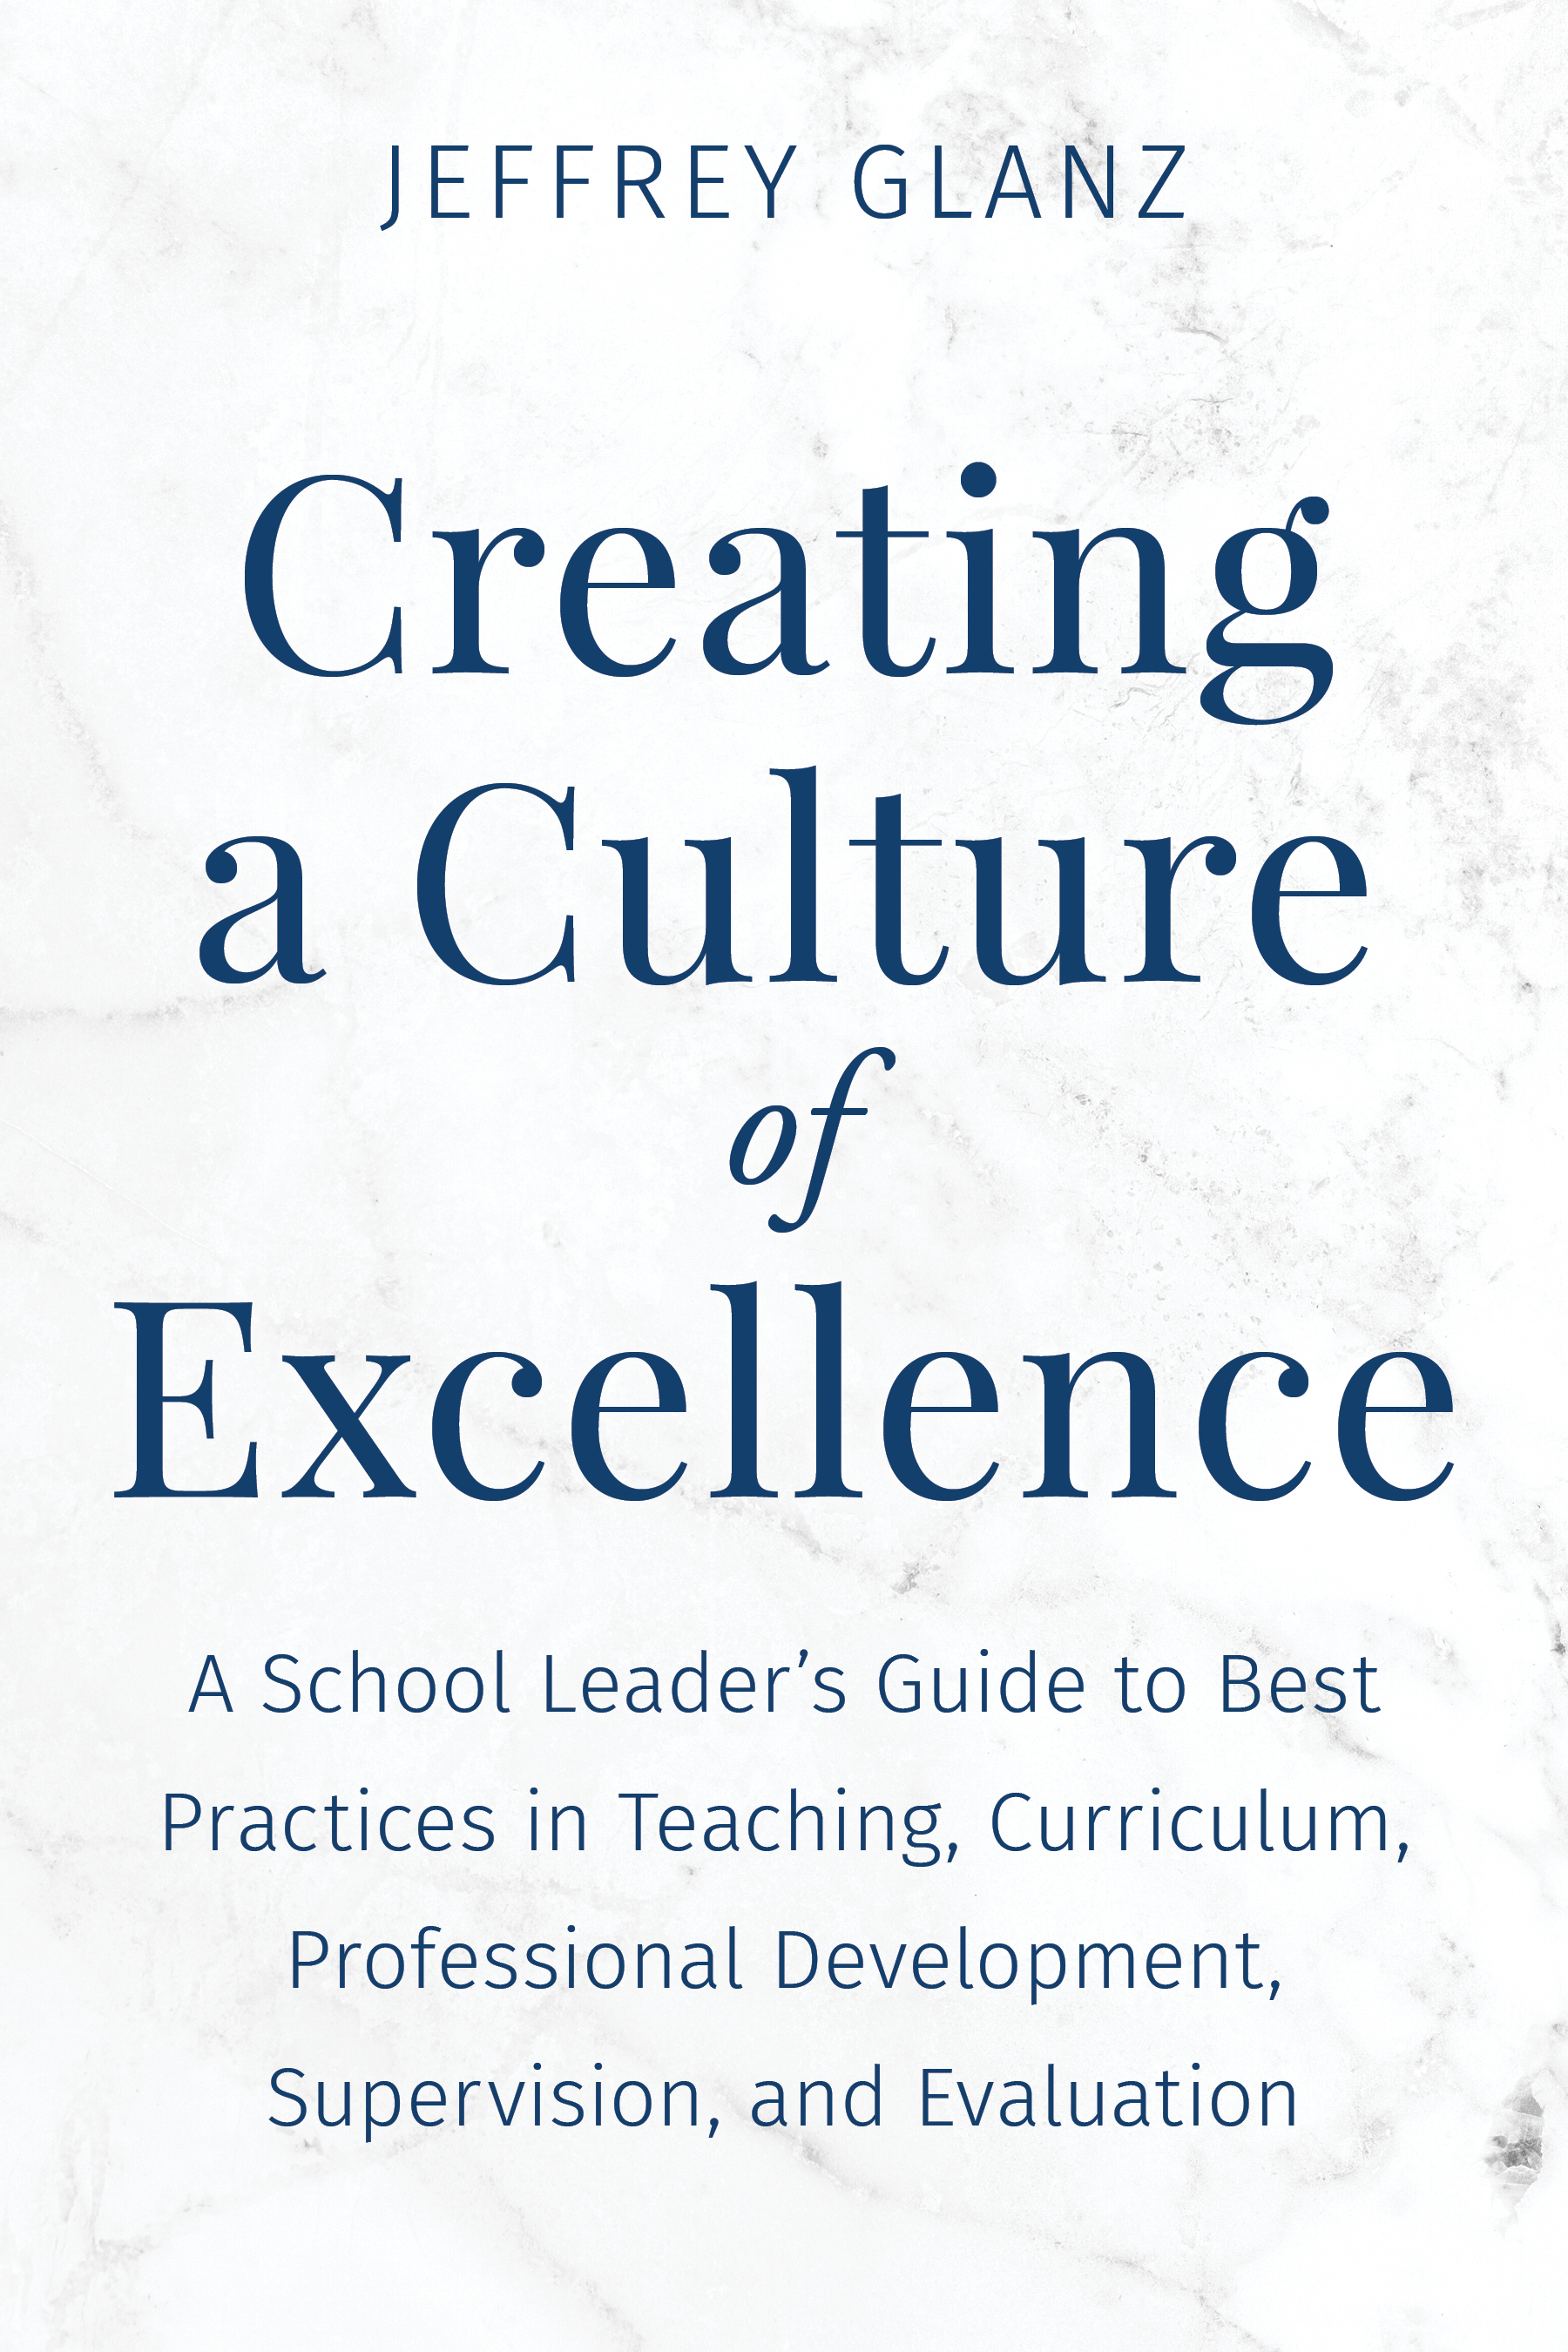 Creating a Culture of Excellence: A School Leader's Guide to Best Practices in Teaching, Curriculum, Professional Development, Supervision, and Evaluation